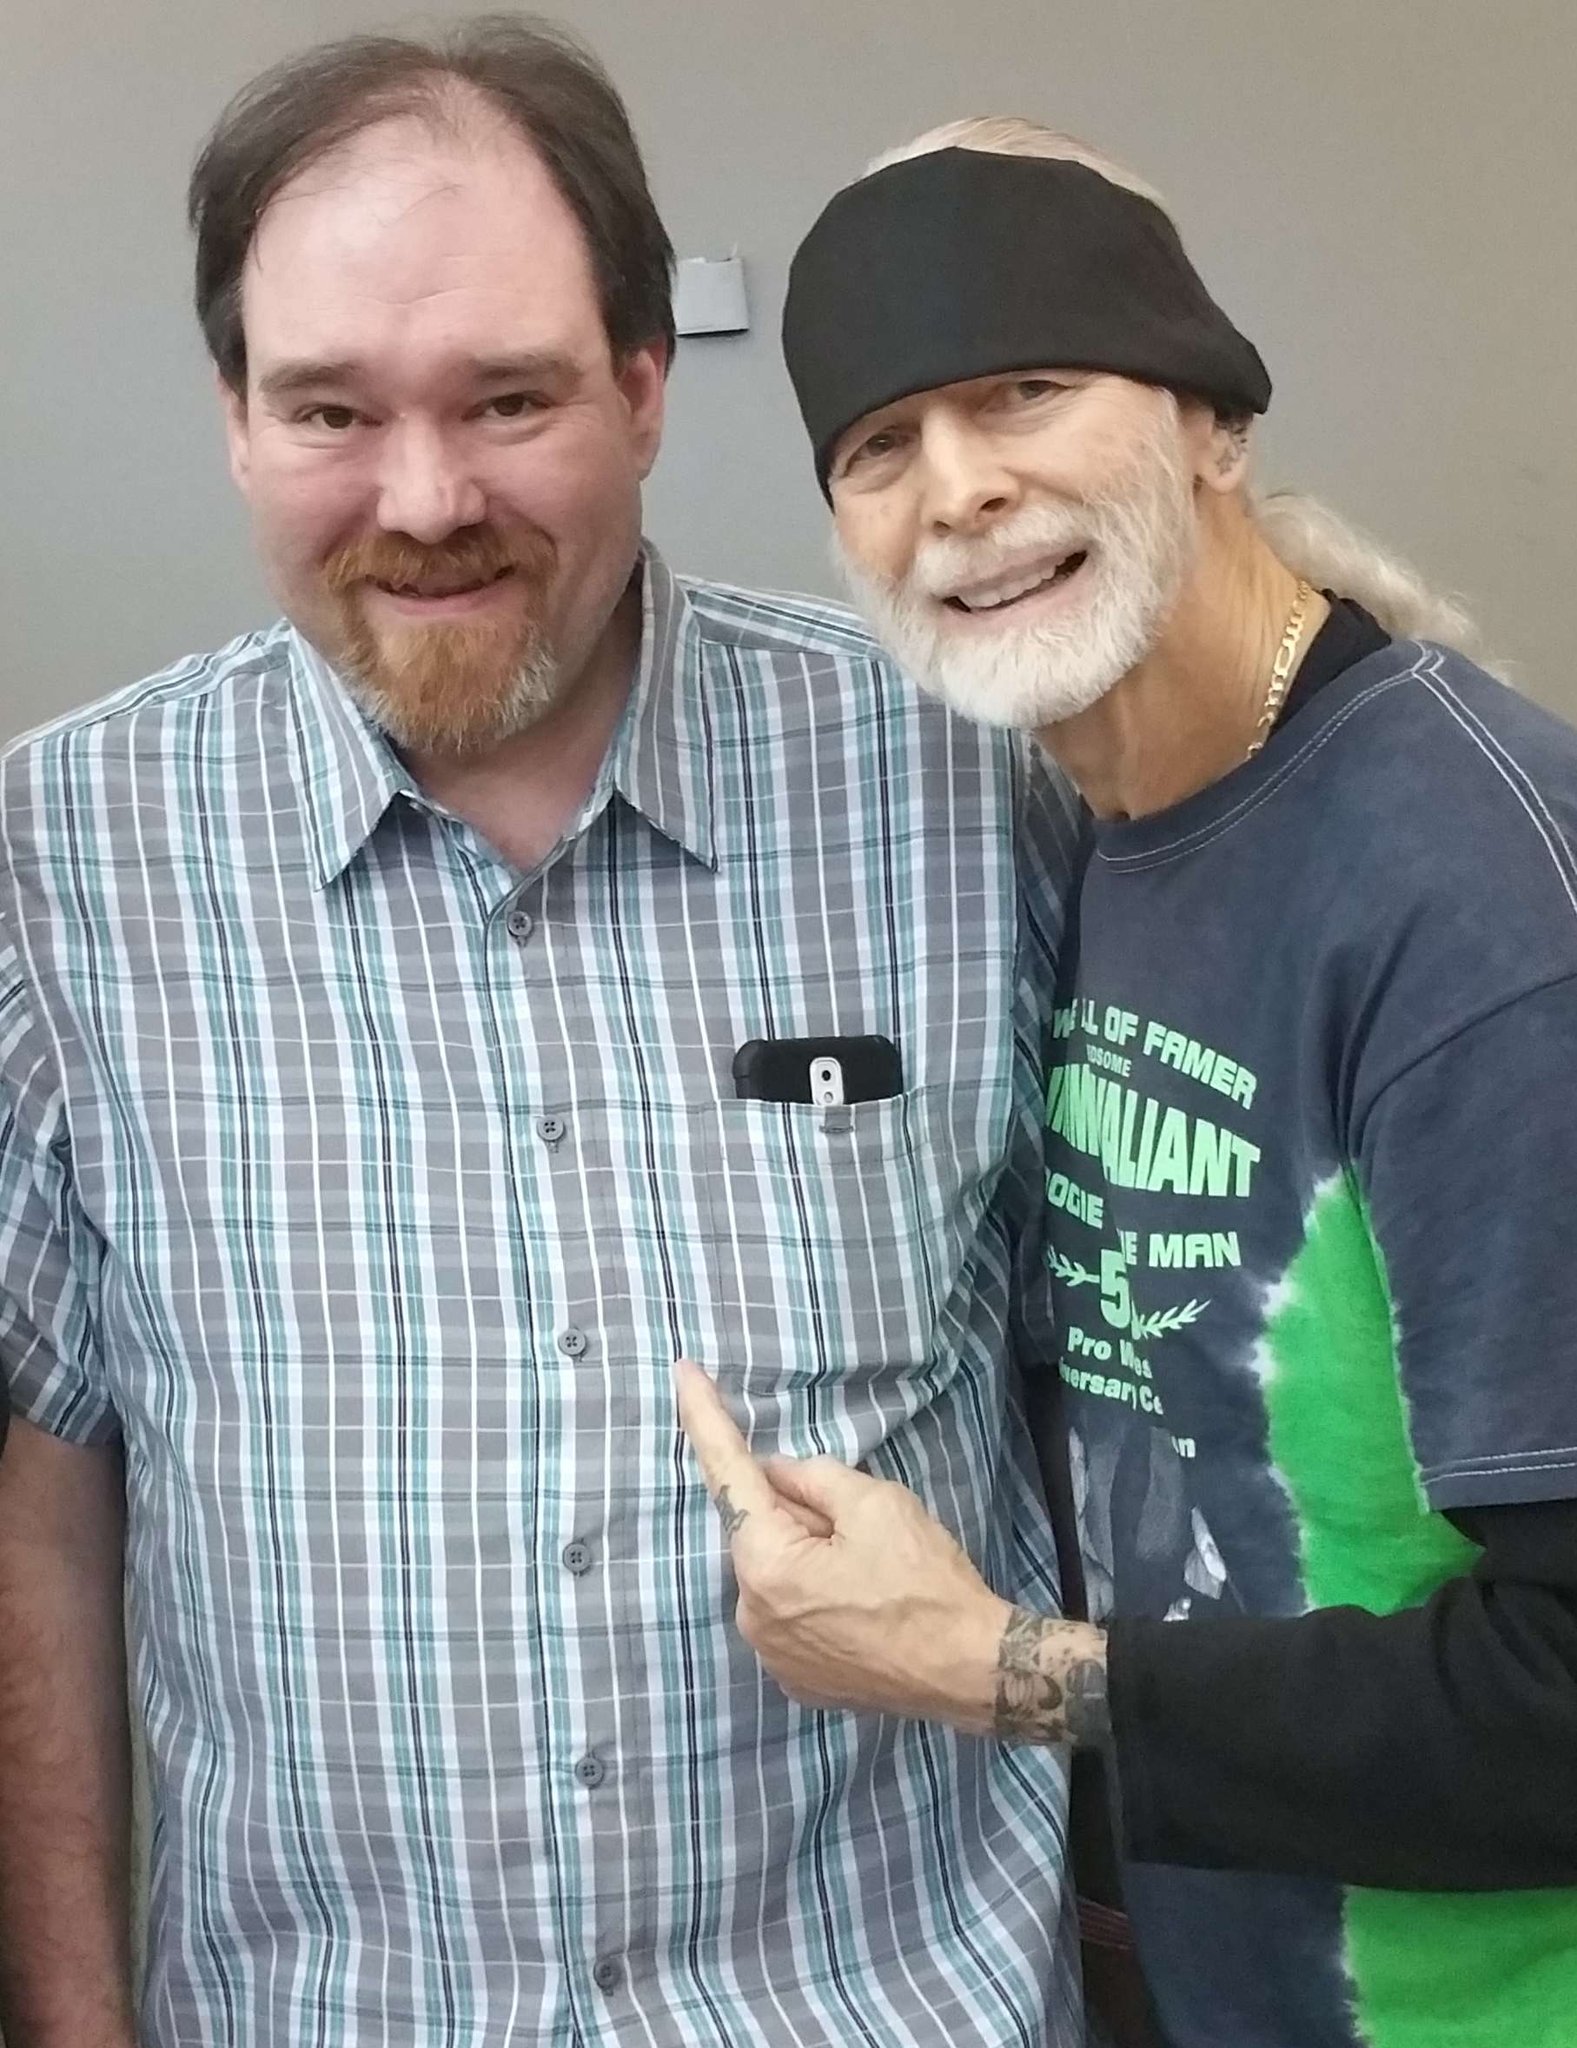 Happy birthday wishes go out to the boogie-woogie man himself, handsome Jimmy Valiant. 